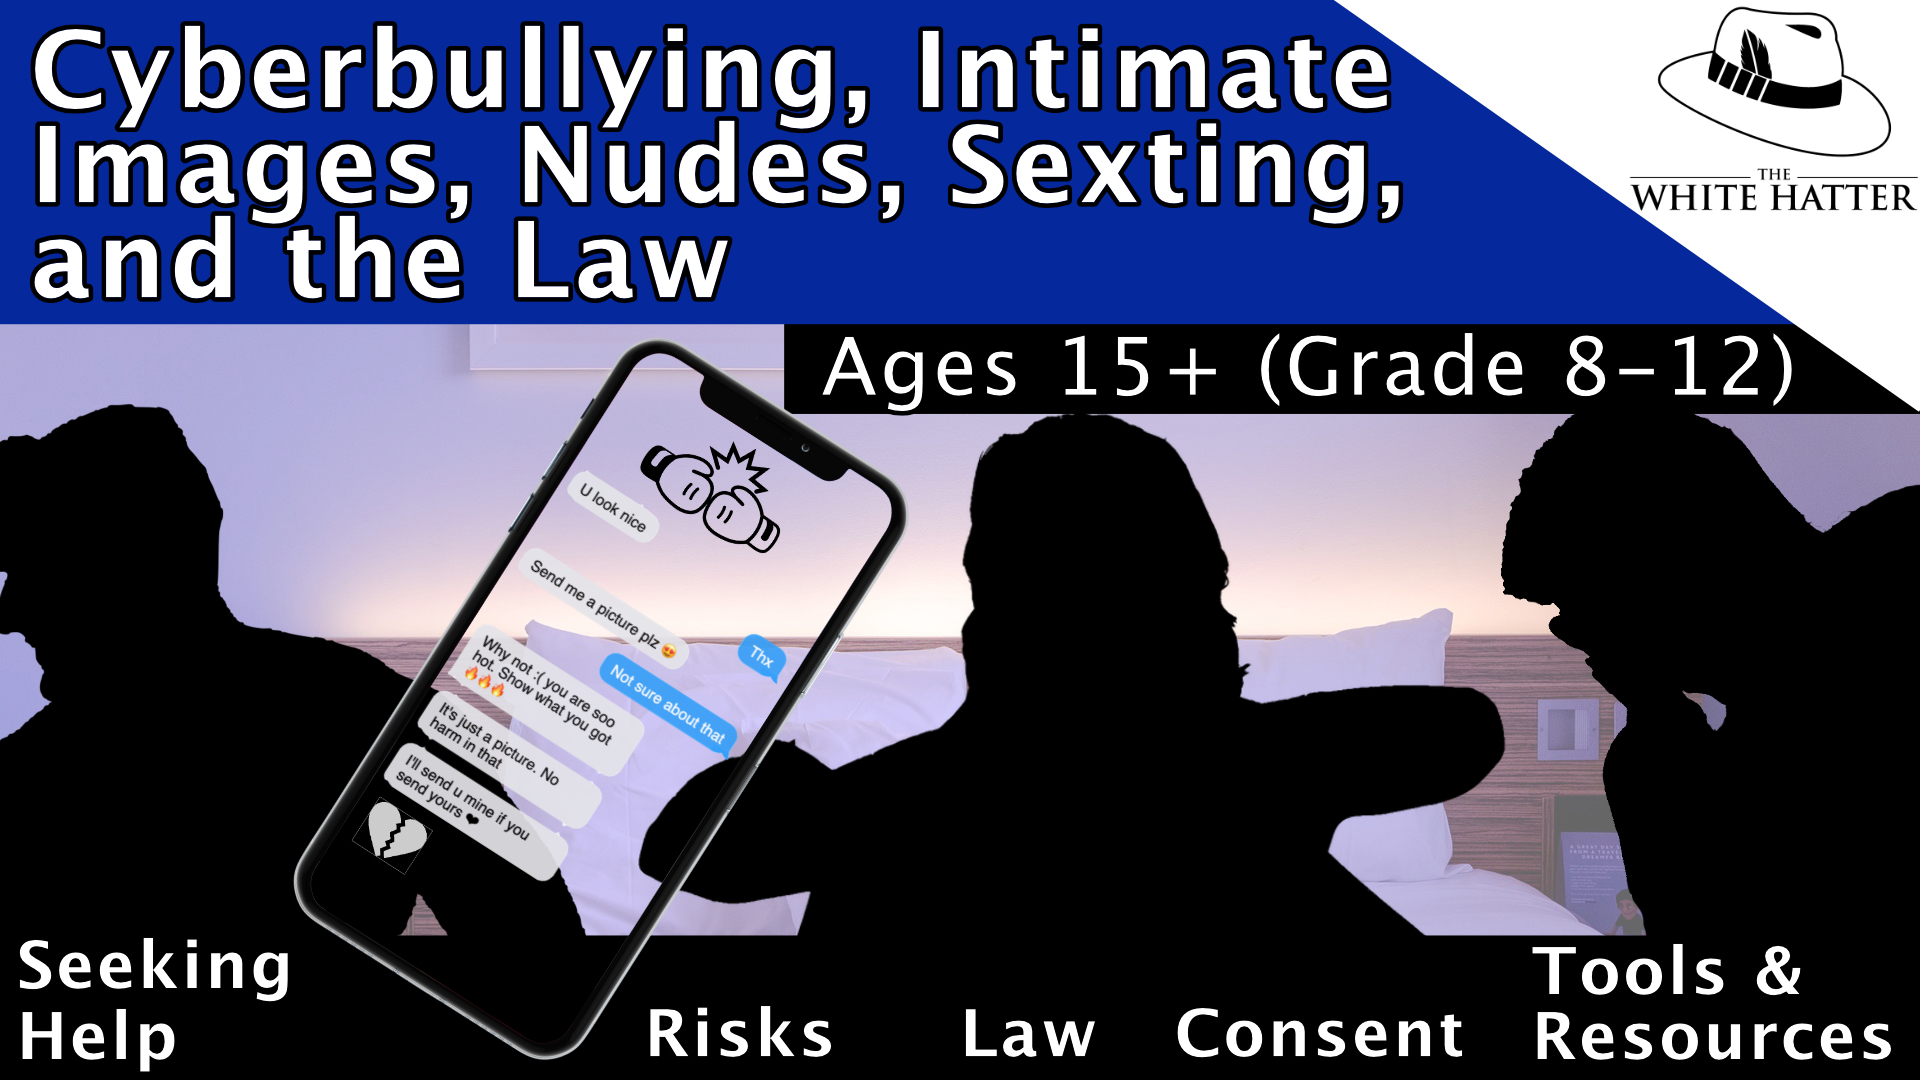 Cyberbullying, Sexting, Nudes, Intimate Images, and The Law Ages 15+ (Grade 8-12)